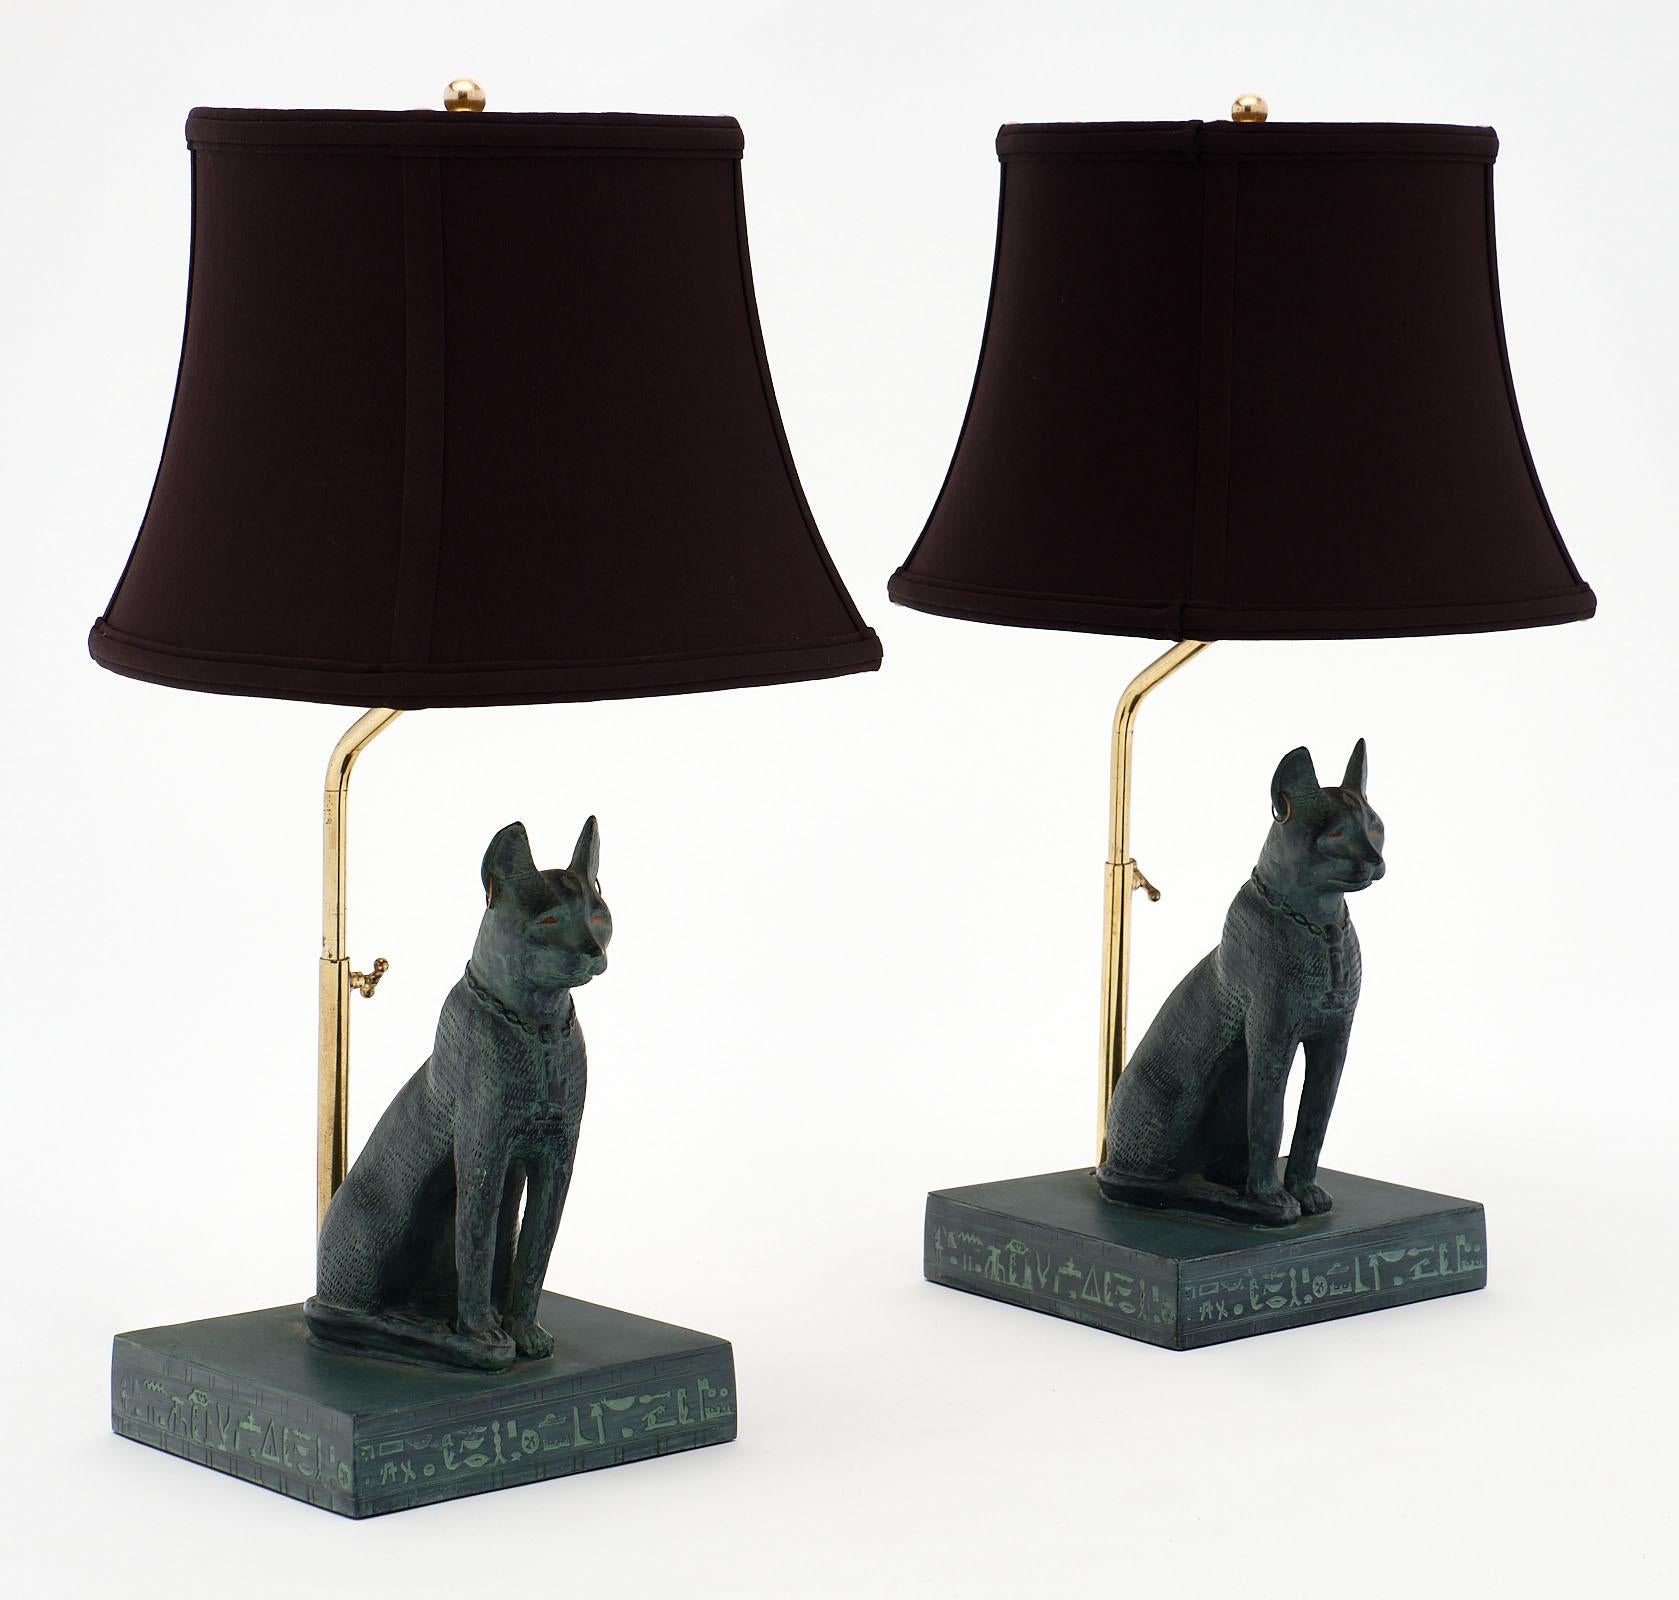 A pair of stylized sacred Egyptian cat lamps each sitting on a base adorned with hieroglyphs. This unique pair has been newly wired to fit US standards.